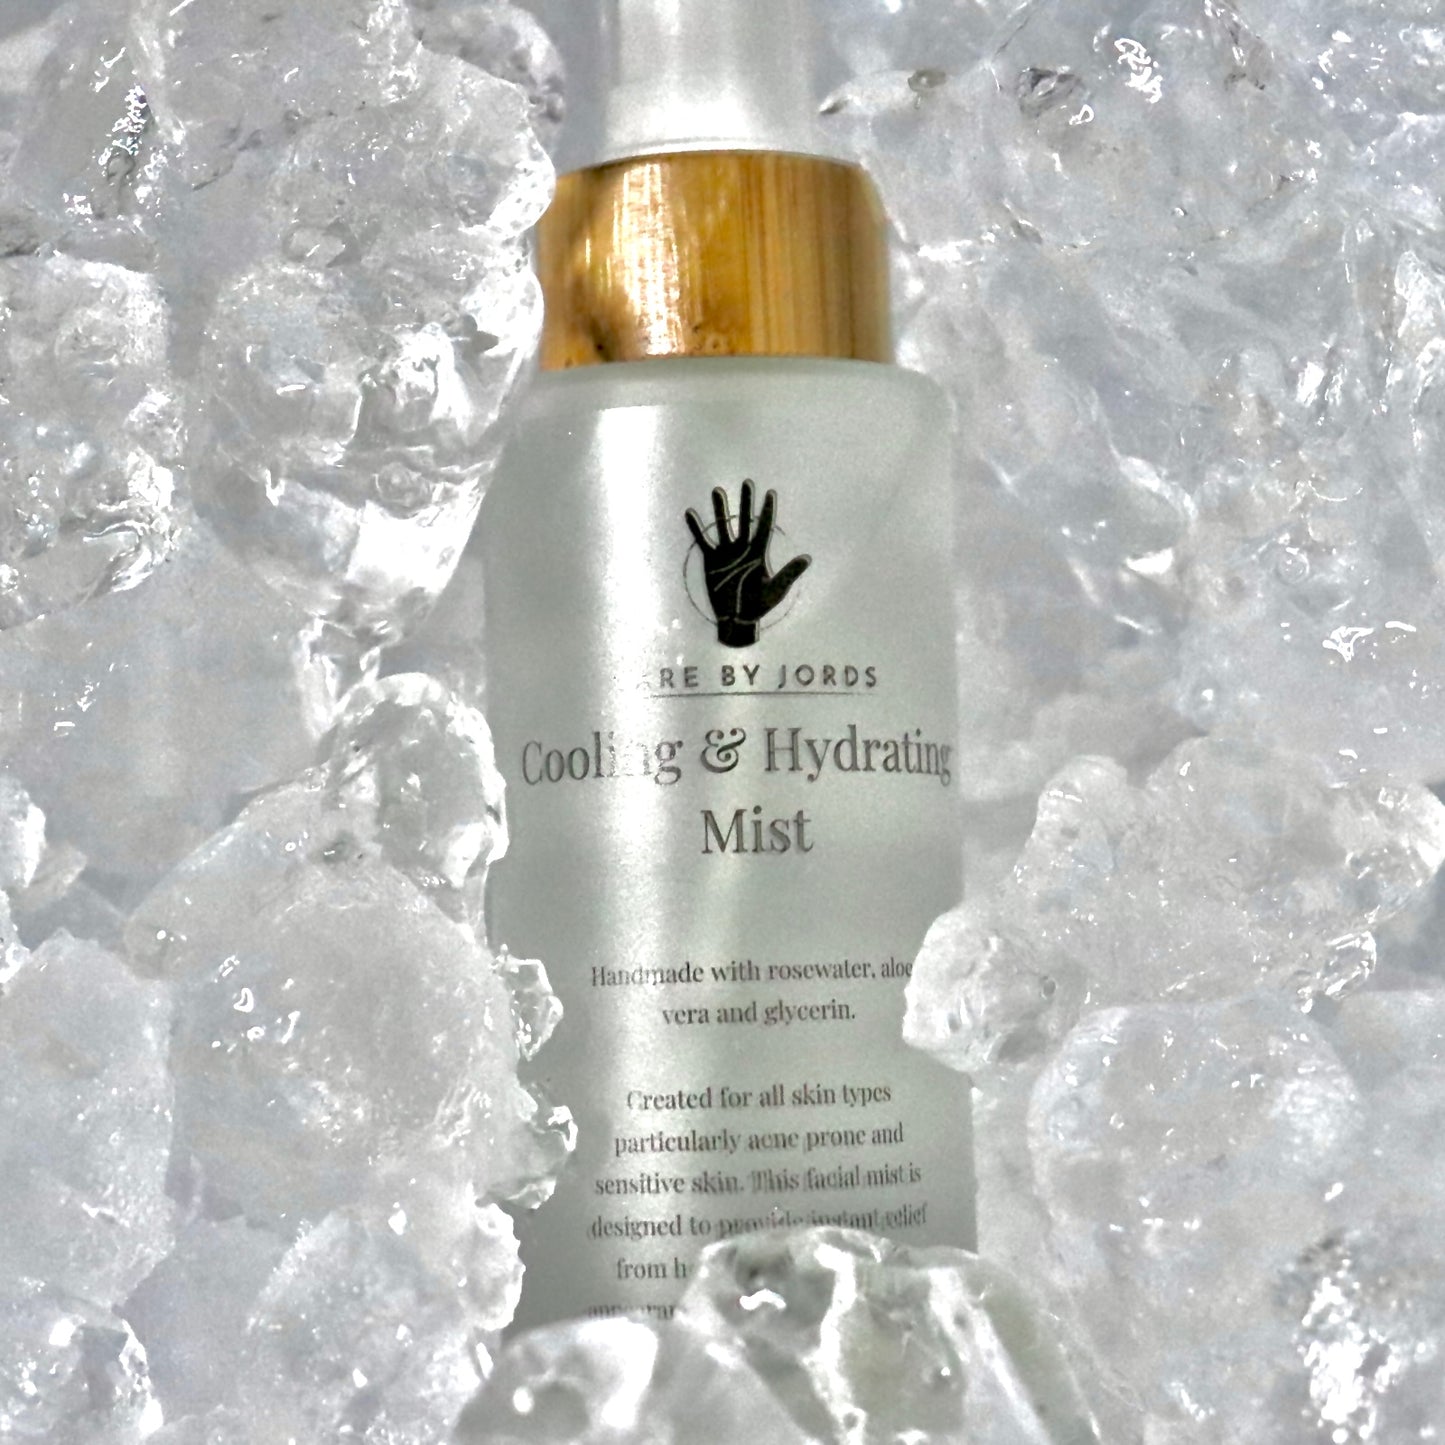 Cooling & Hydrating Mist